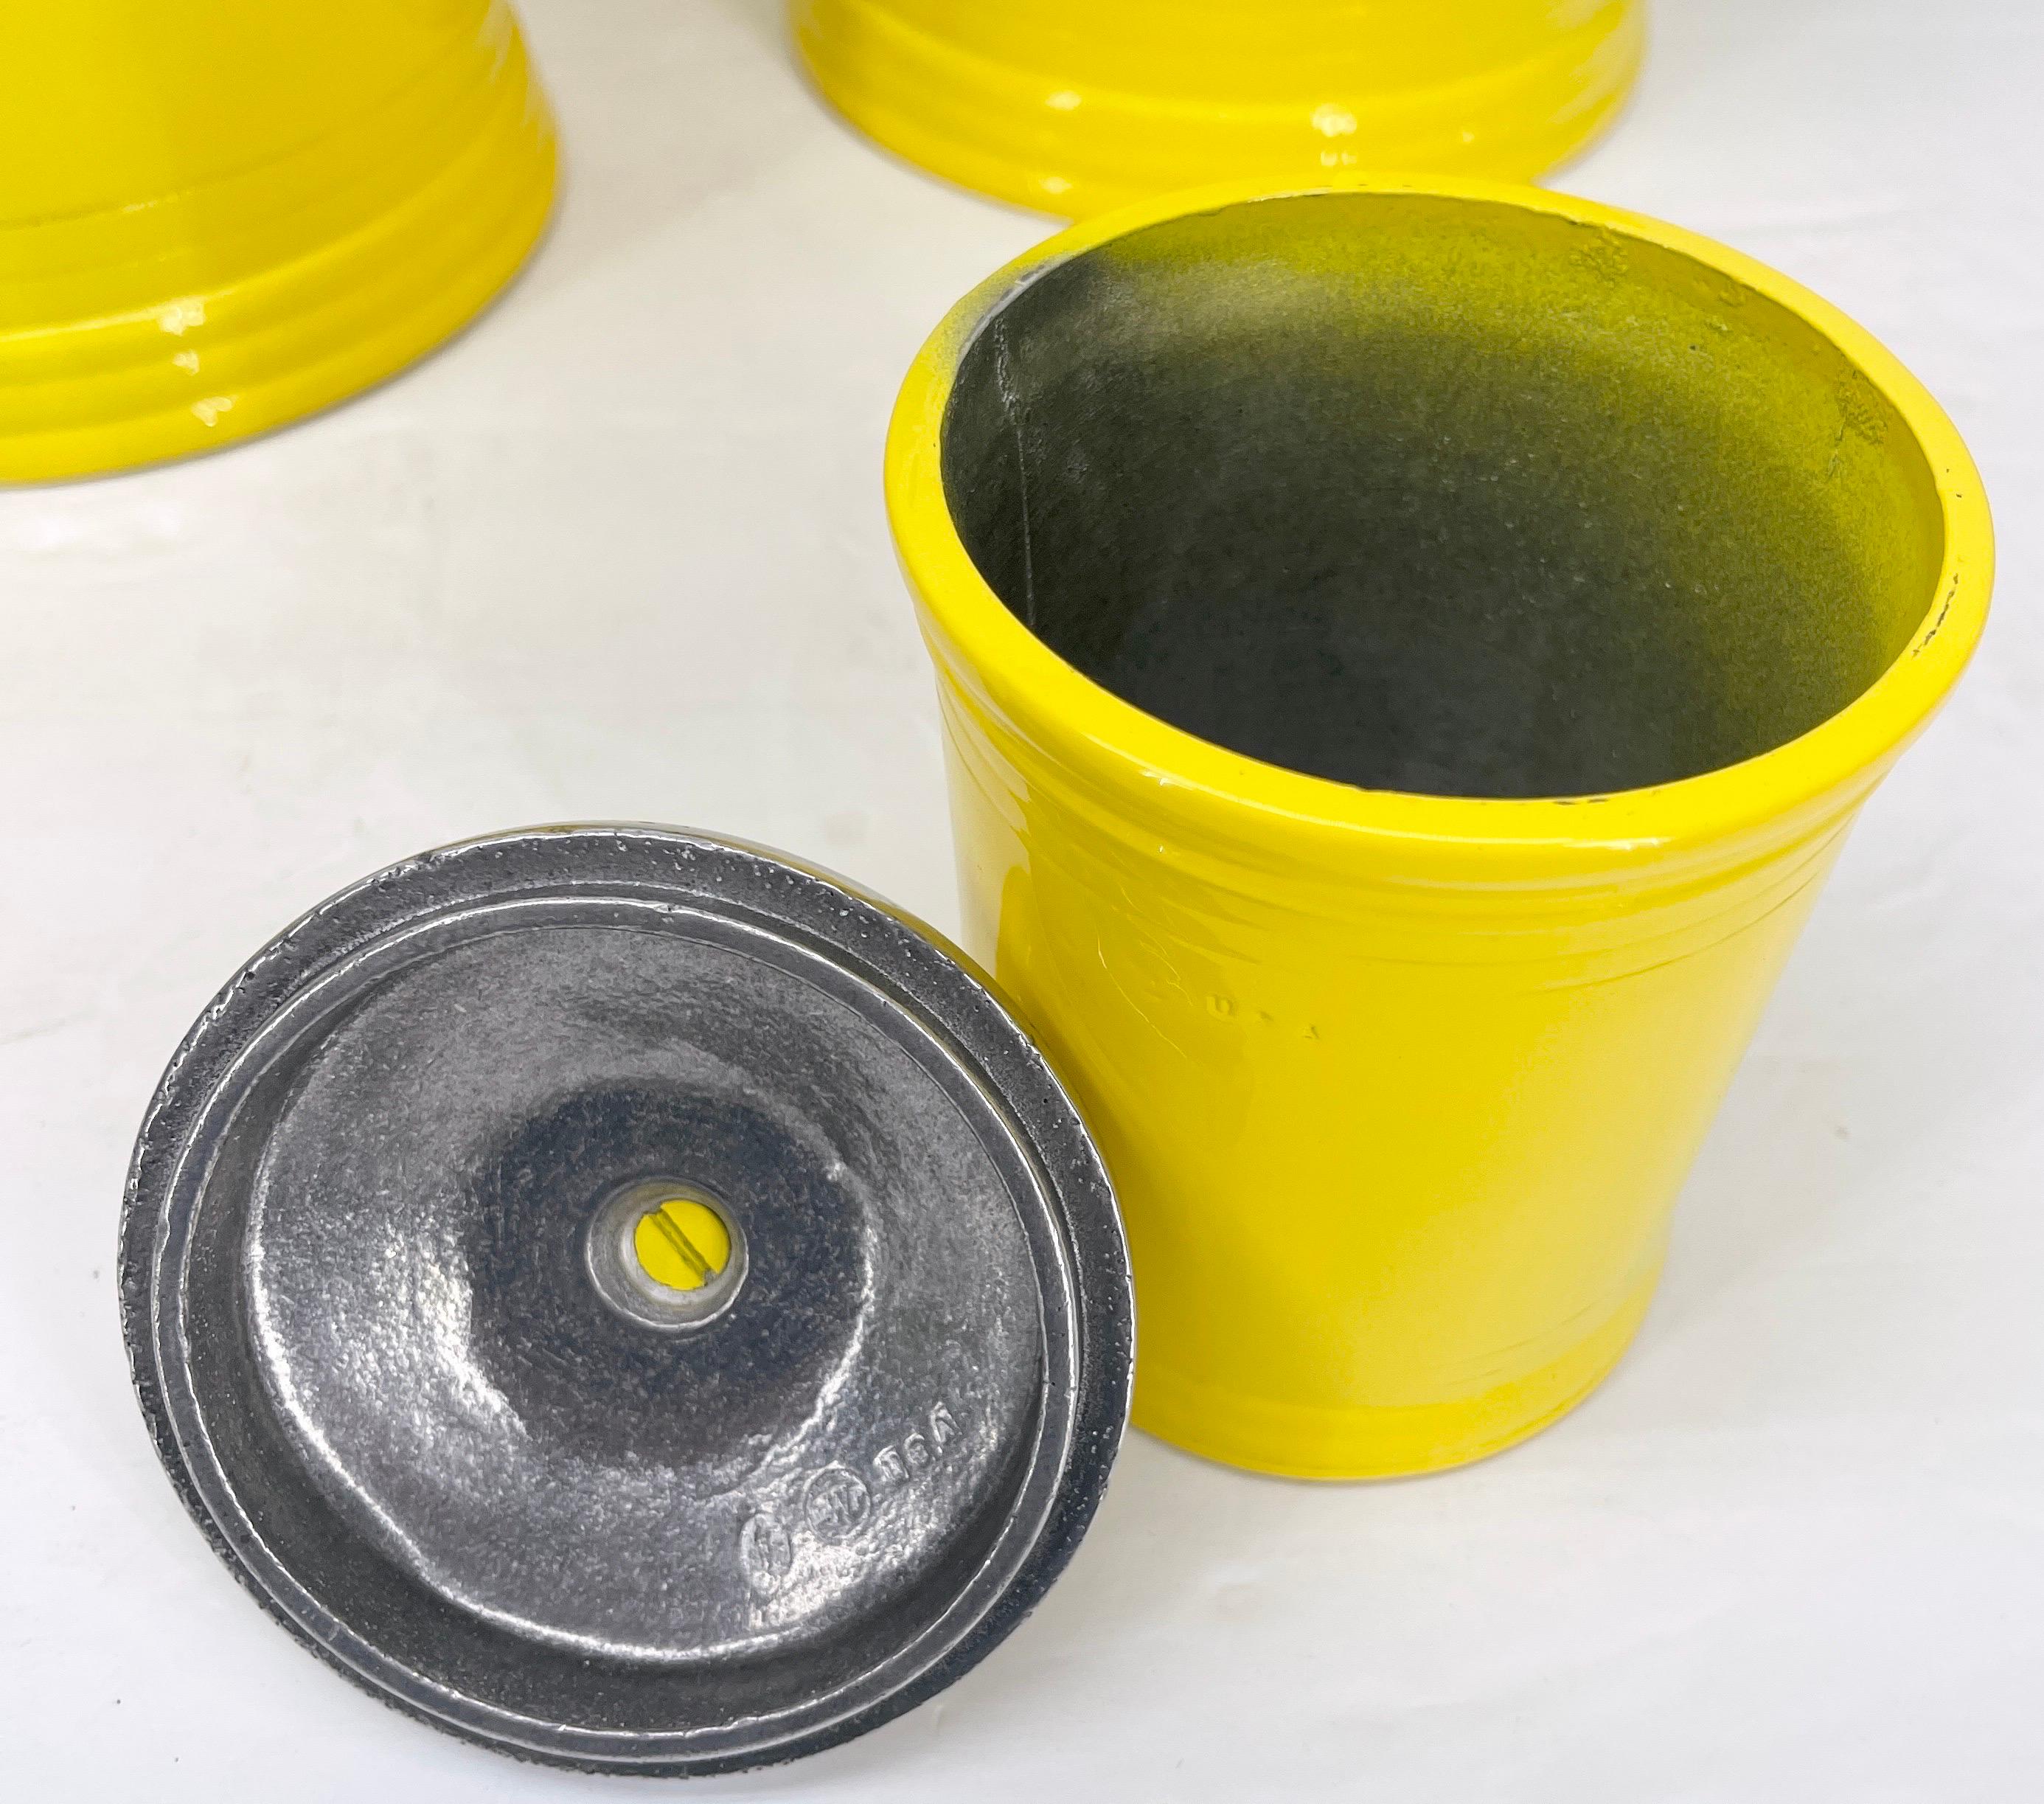 Vintage Kitchen or Bathroom Canister Jars Set, Bright Yellow Powder Coated 4